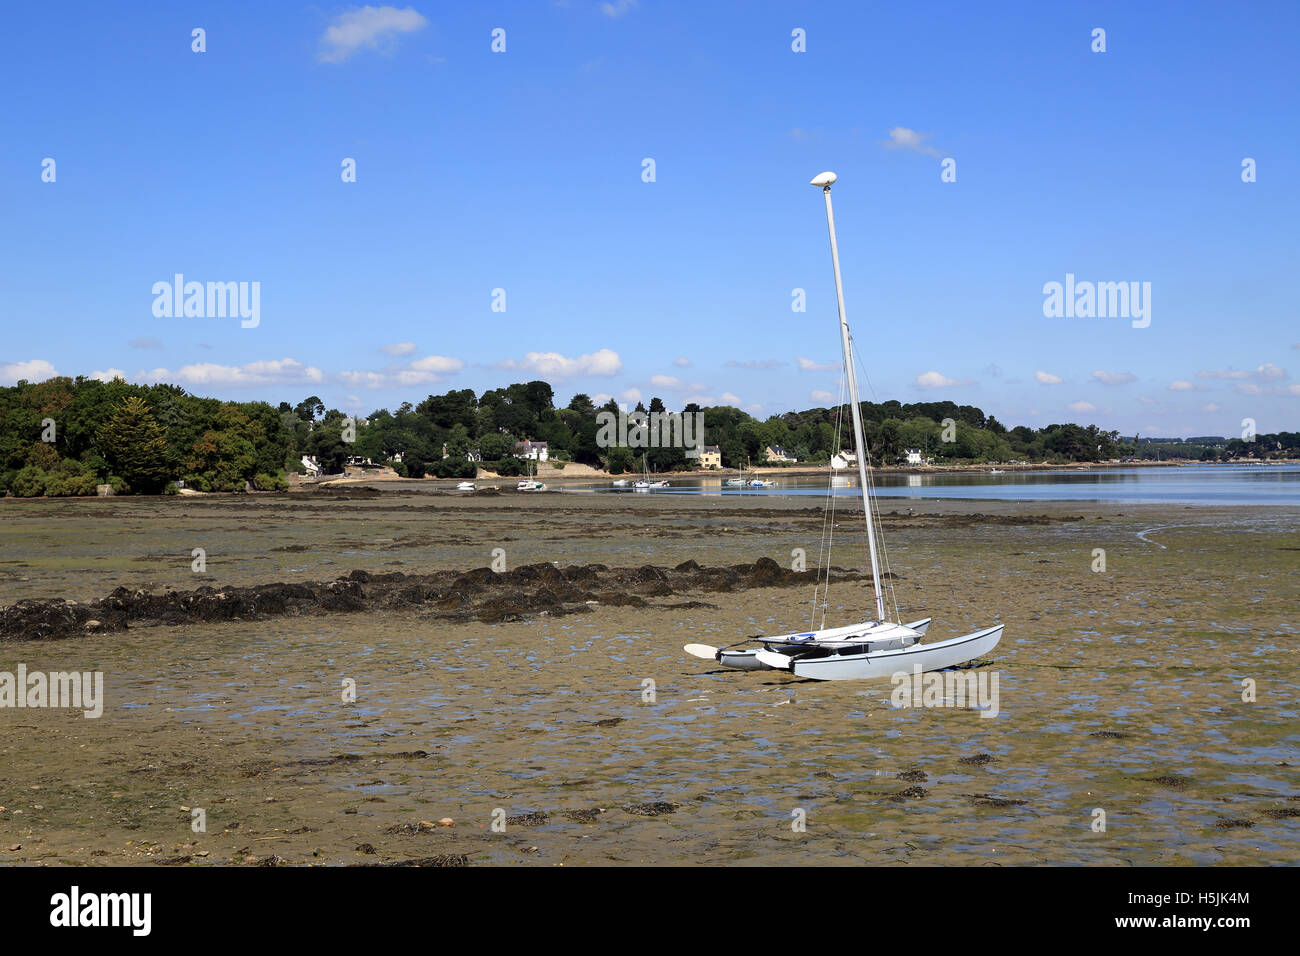 Catamaran on beach at low tide at Brouel, Ile Aux Moines, Morbihan, Brittany, France Stock Photo